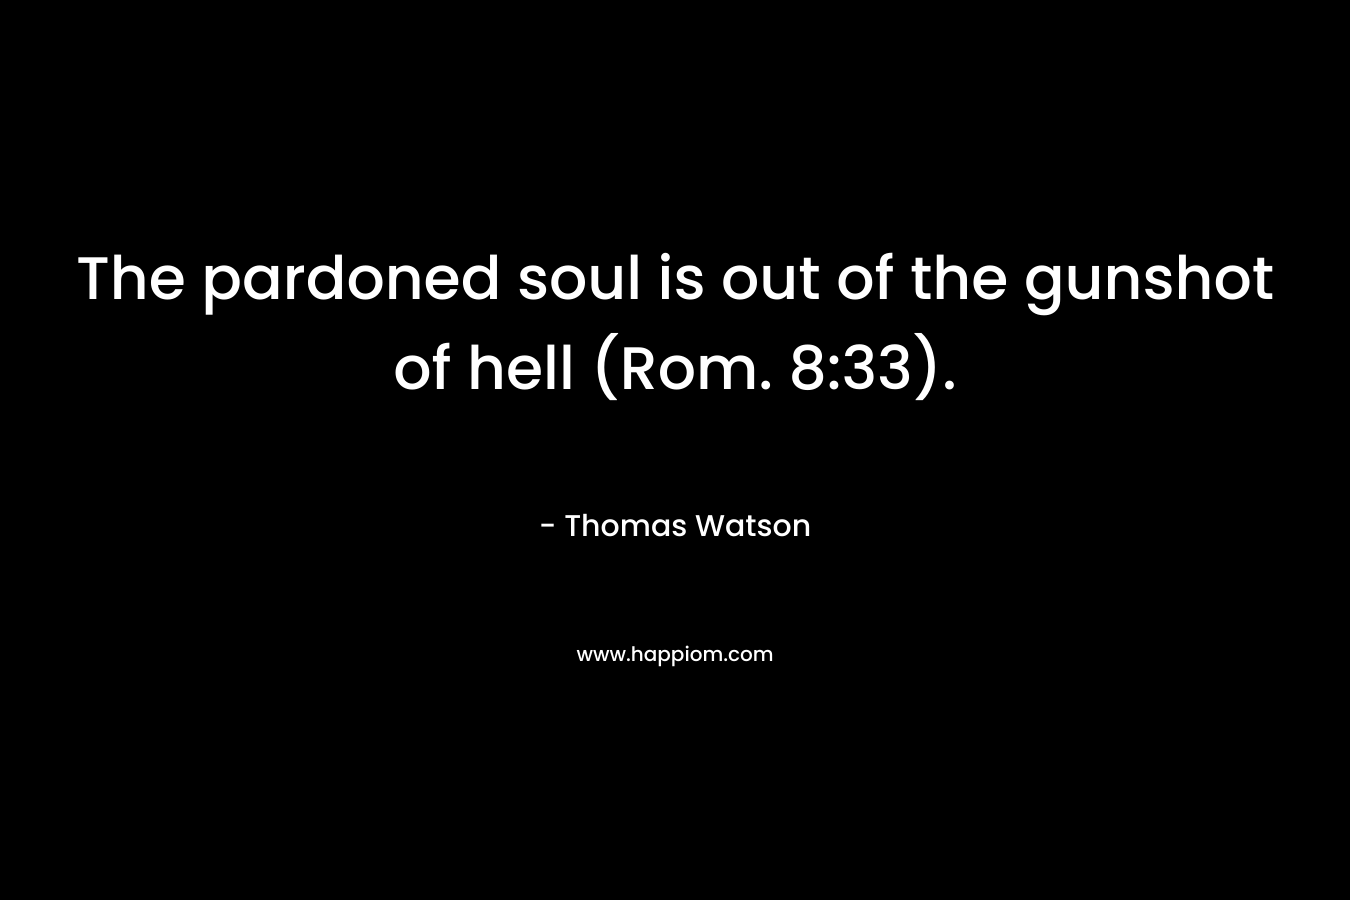 The pardoned soul is out of the gunshot of hell (Rom. 8:33). – Thomas Watson